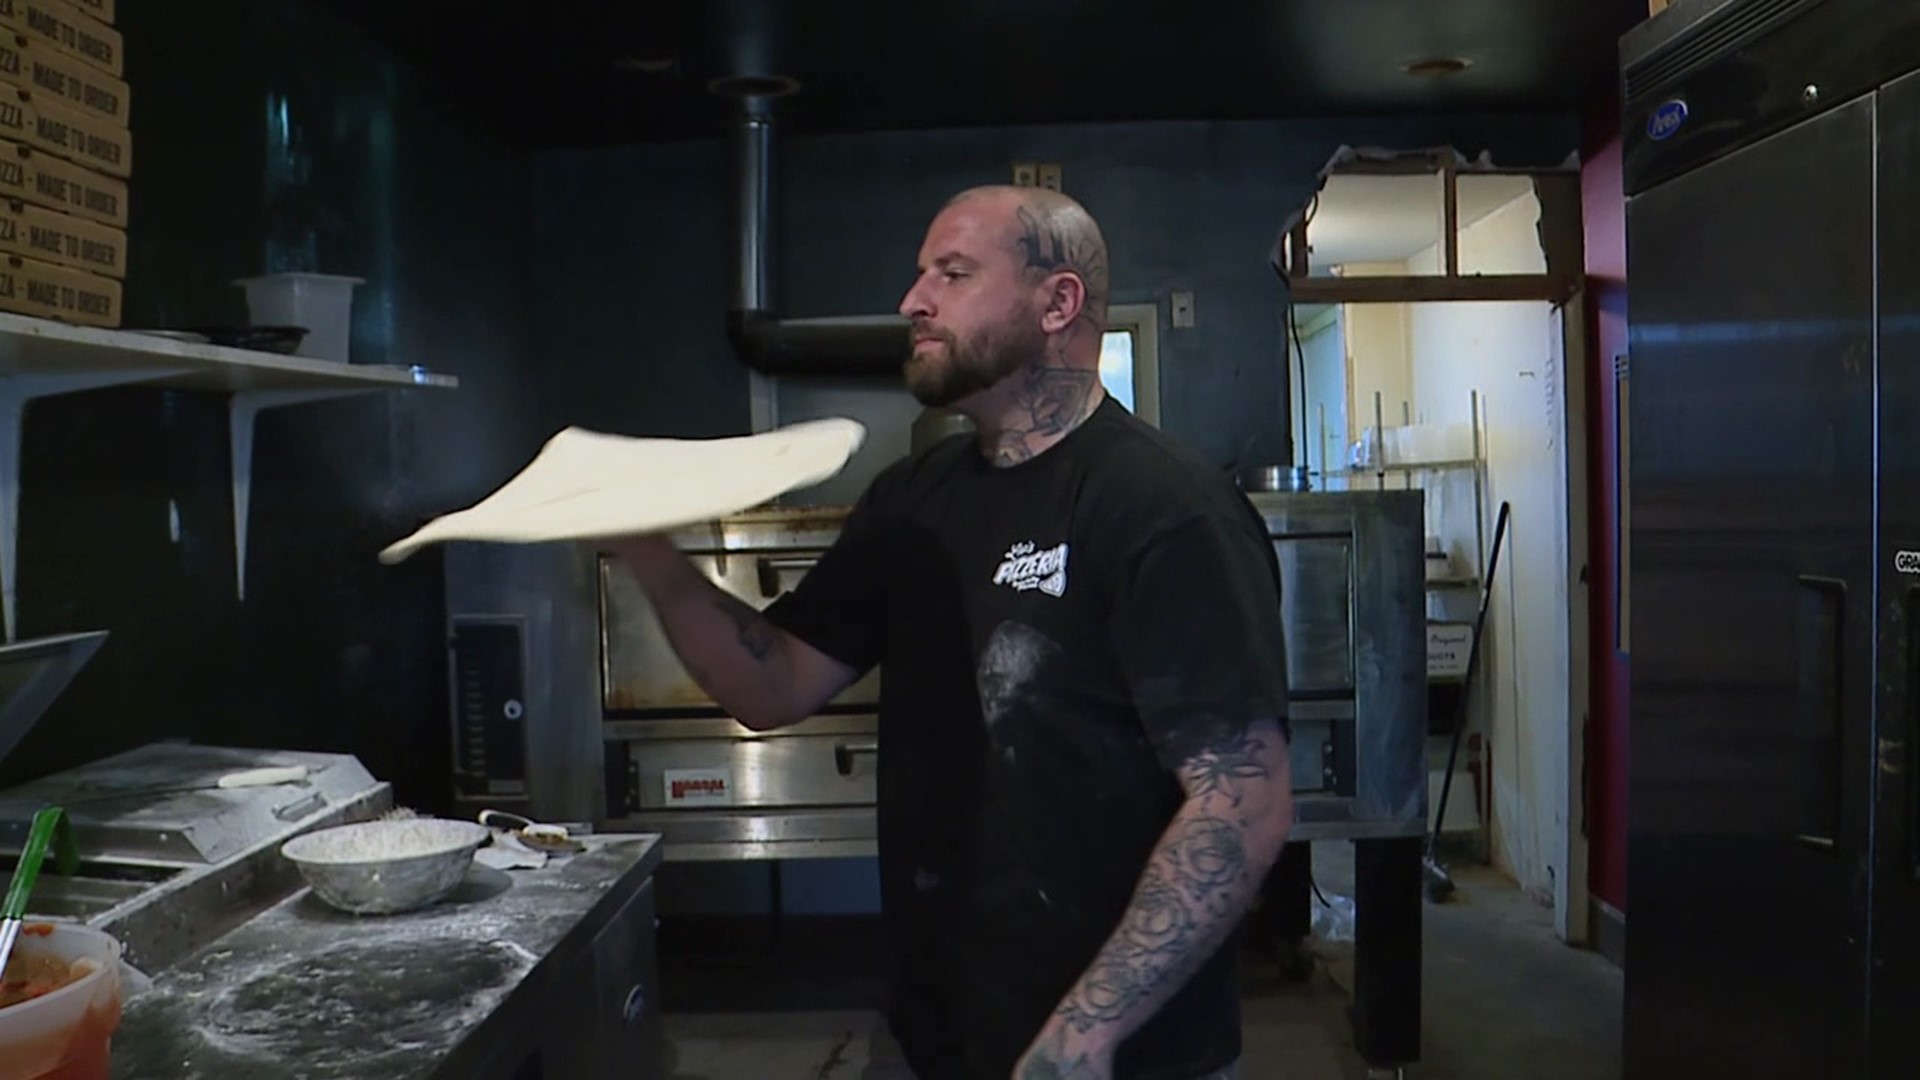 A pizza shop in Williamsport known for its service to the community is scaling back its hours. Newswatch 16's Chris Keating spoke with the owner about the decision.